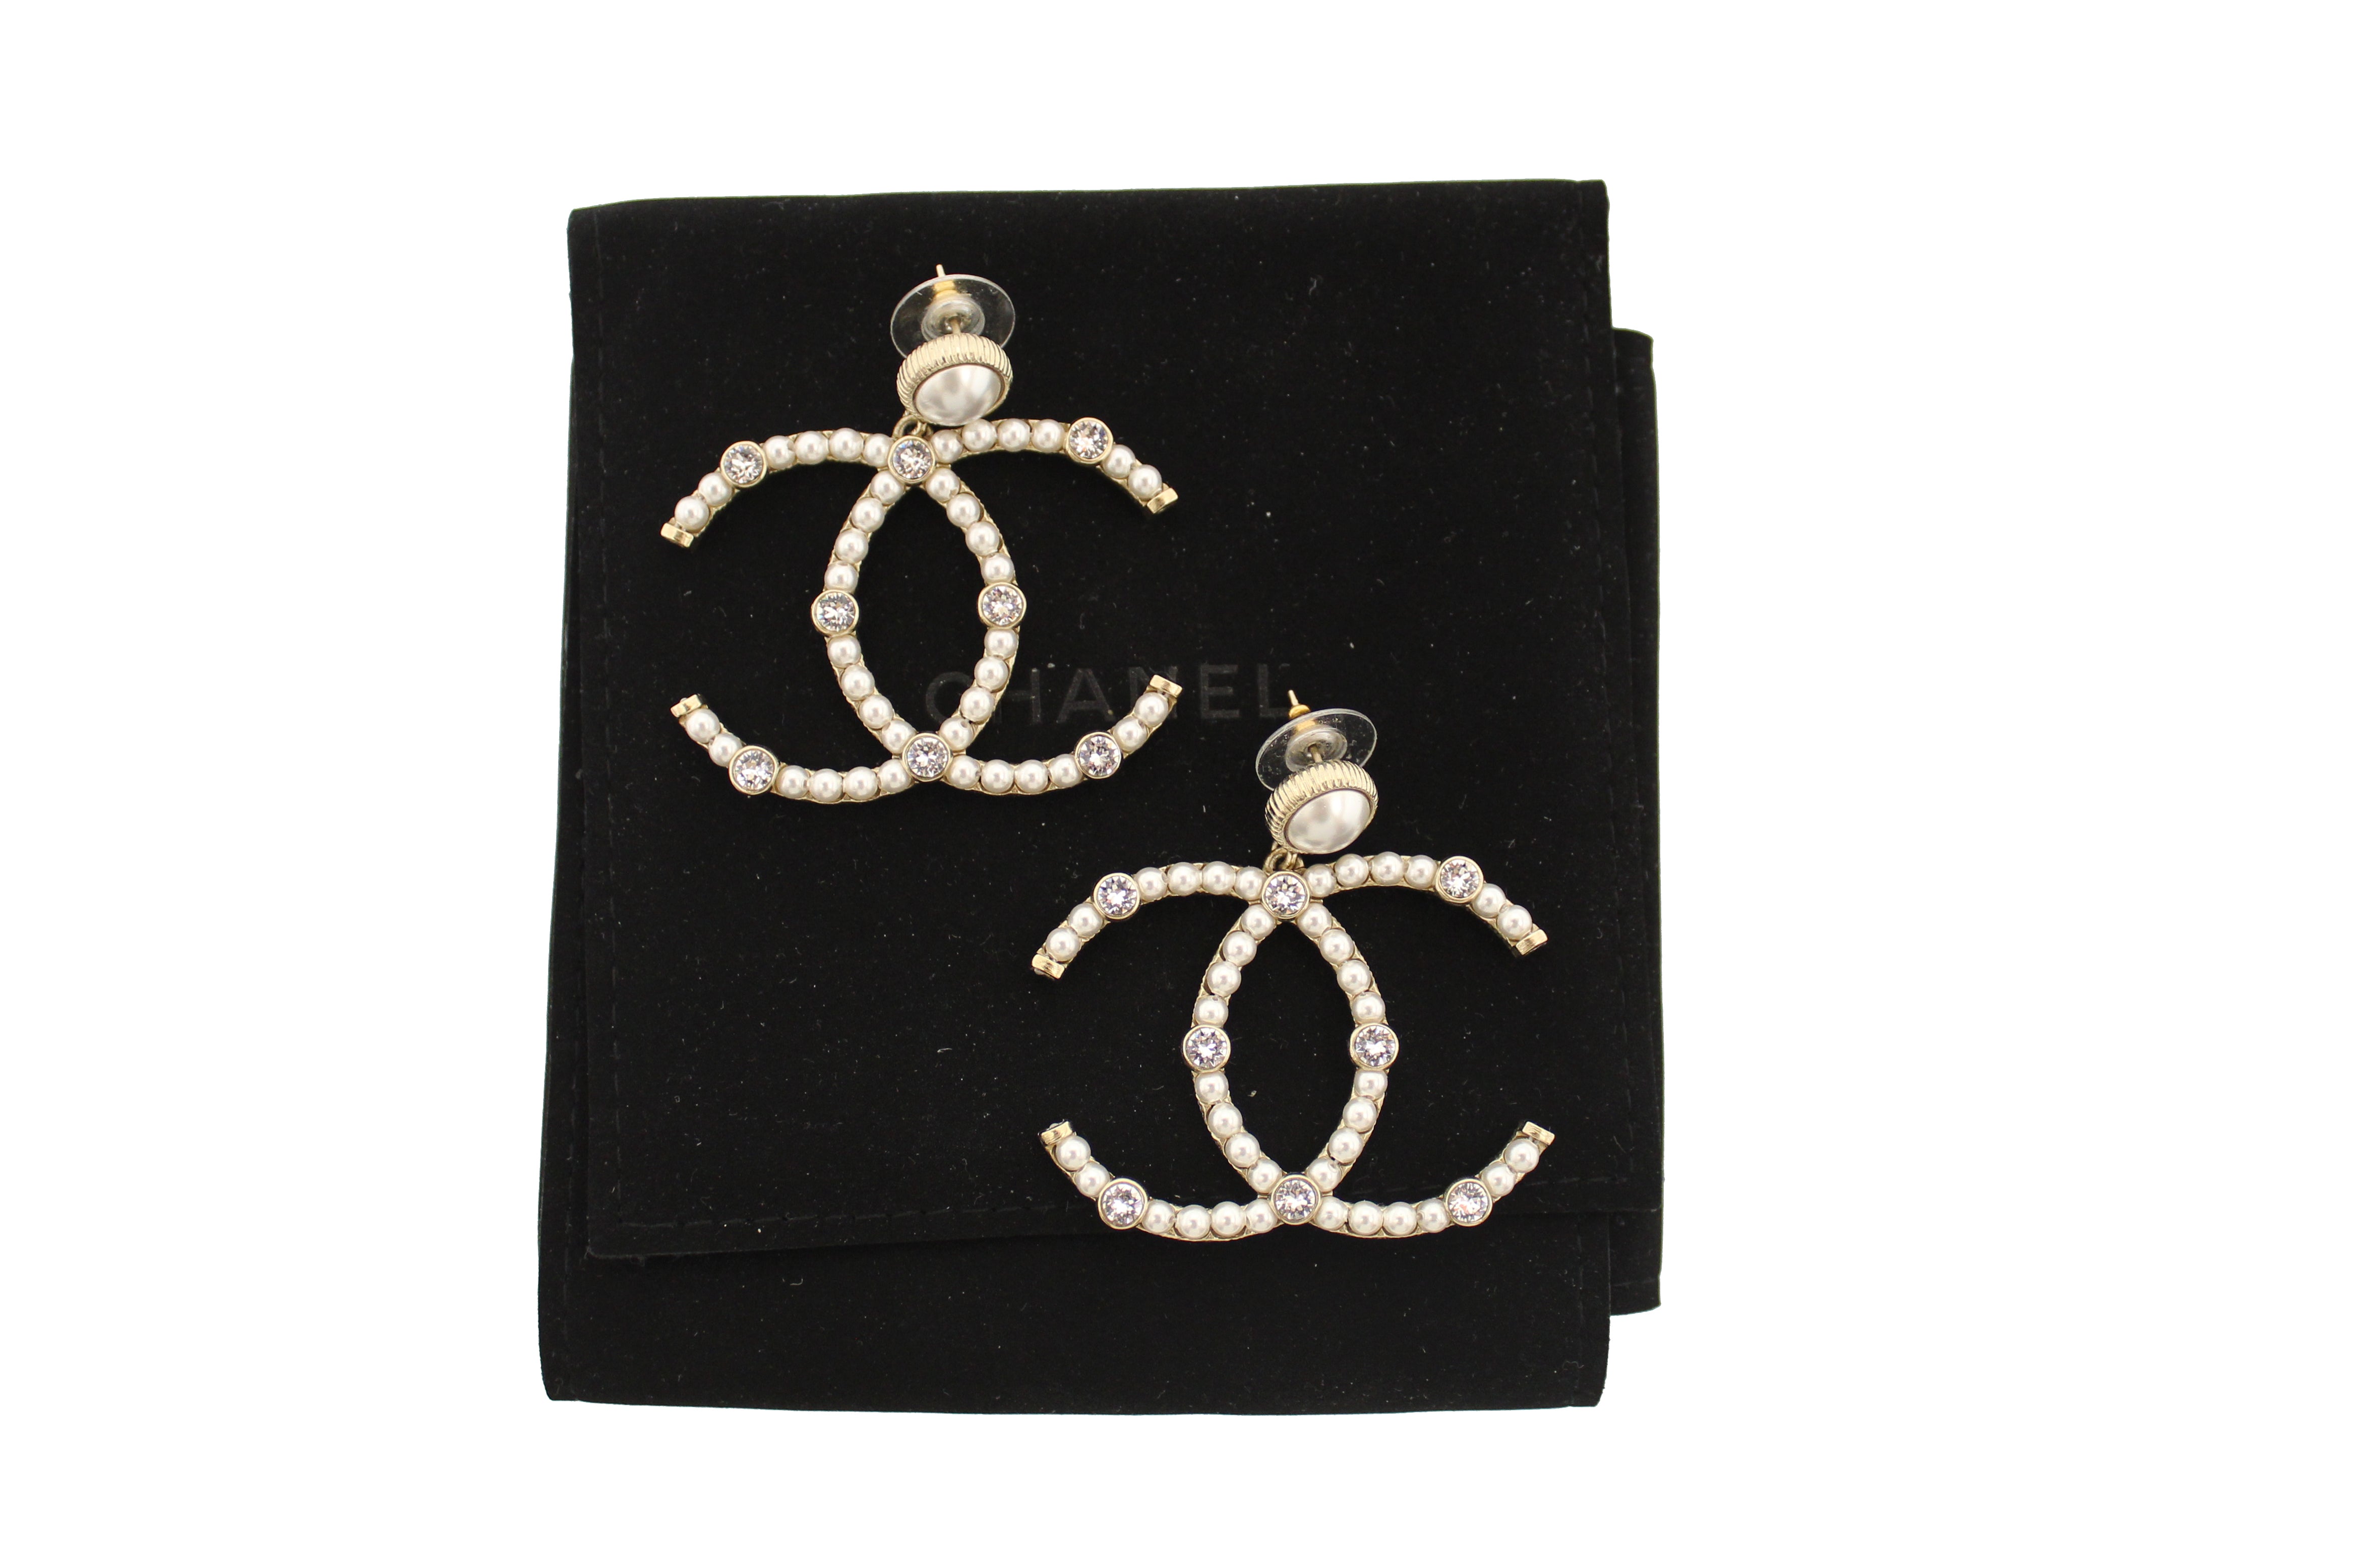 Authentic Chanel Classic CC Light Gold-Tone Pearl and Crystal Earrings –  Paris Station Shop